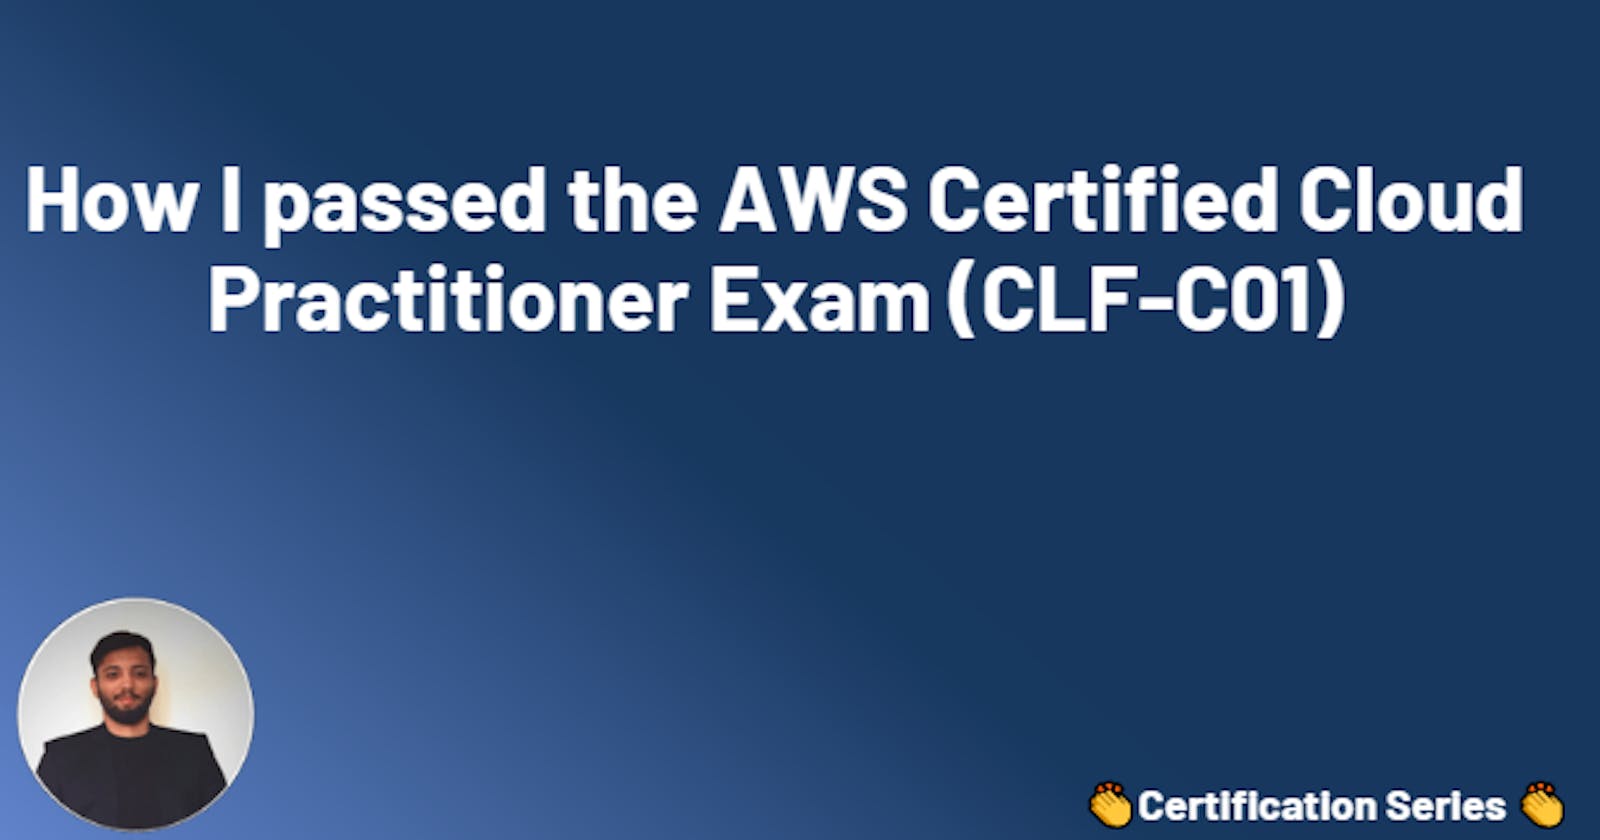 How I passed the AWS Certified Cloud Practitioner Exam (CLF-C01)